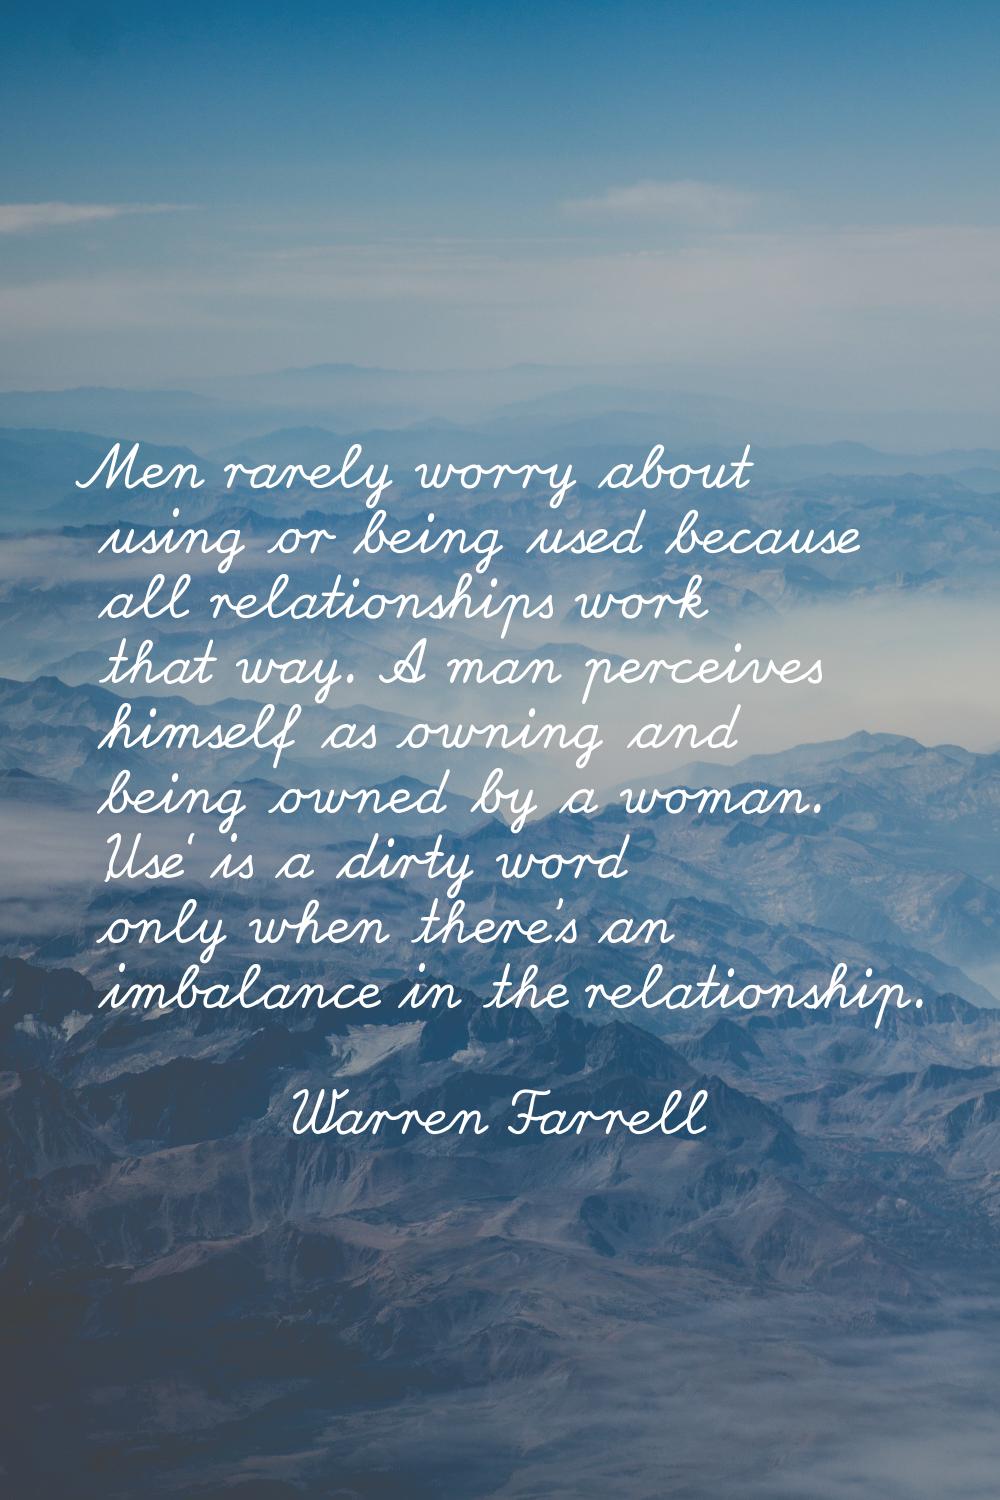 Men rarely worry about using or being used because all relationships work that way. A man perceives